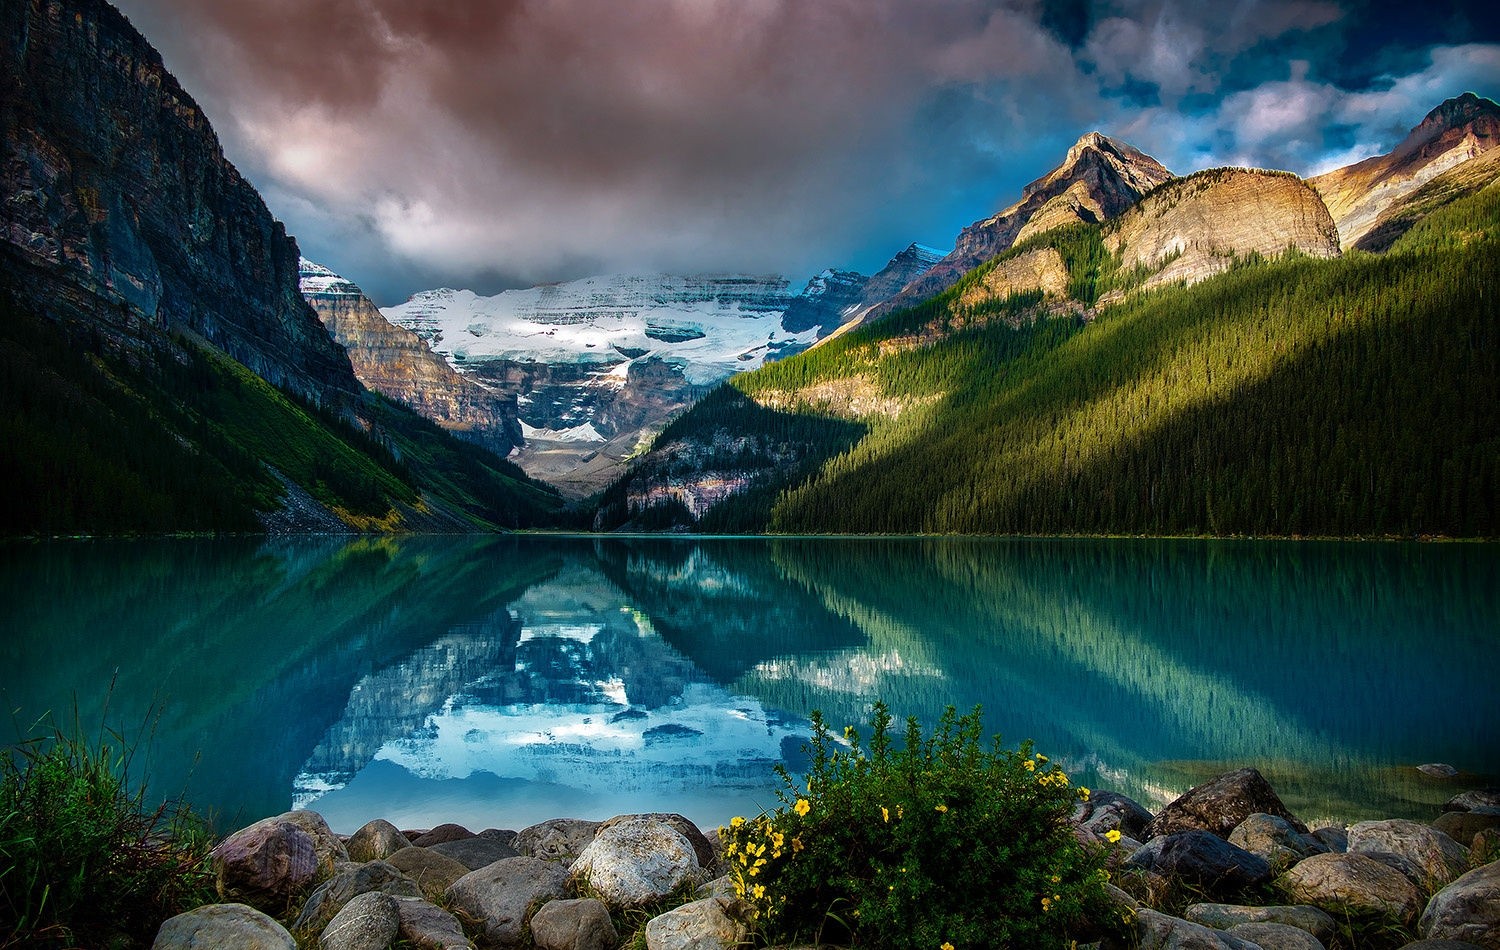 Photography Nature Landscape Lake Mountains Forest Reflection Calm Waters Snow Clouds Wildflowers La 1500x950